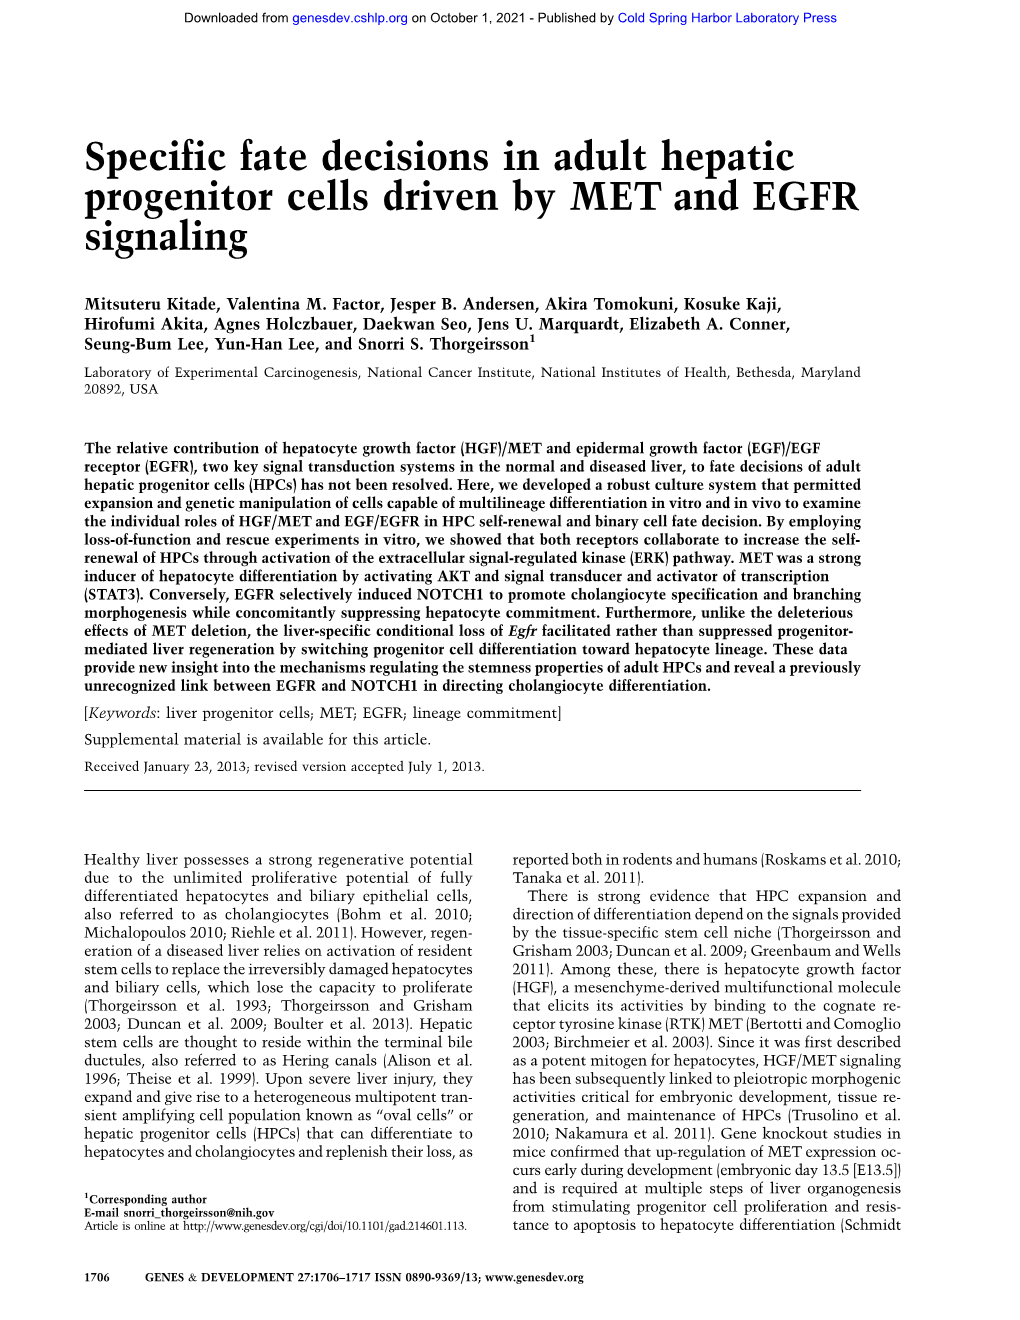 Specific Fate Decisions in Adult Hepatic Progenitor Cells Driven by MET and EGFR Signaling